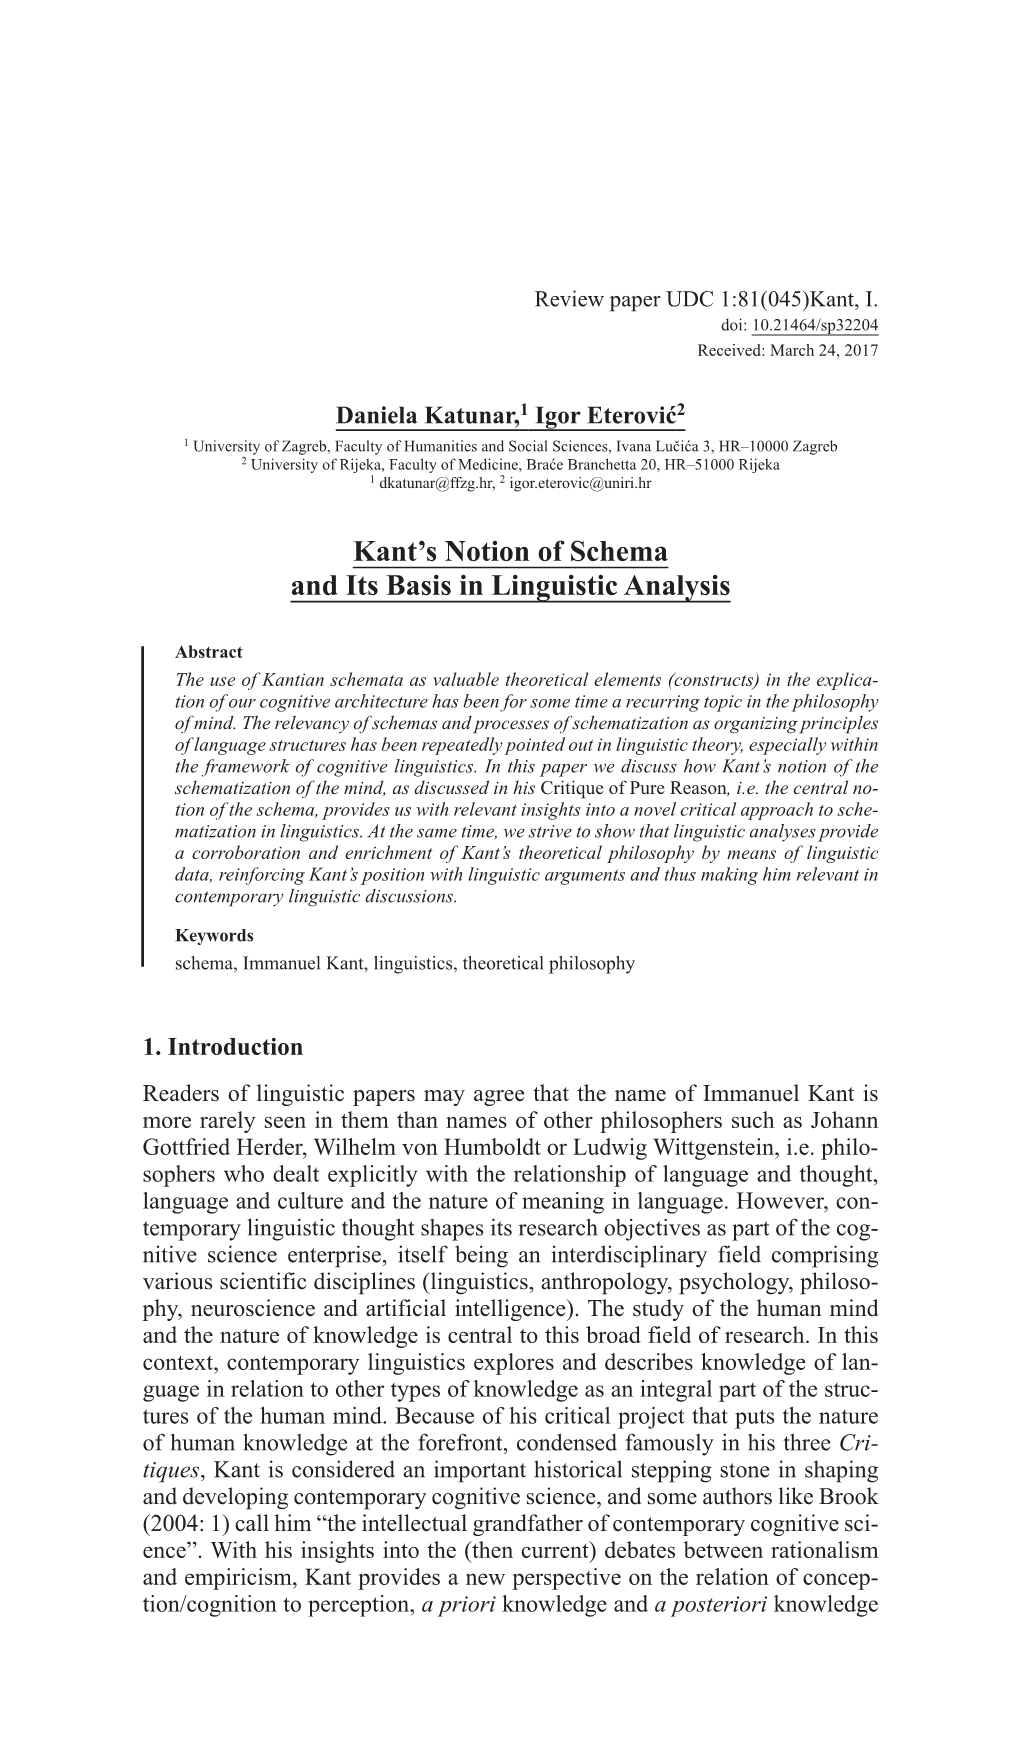 Kant's Notion of Schema and Its Basis in Linguistic Analysis